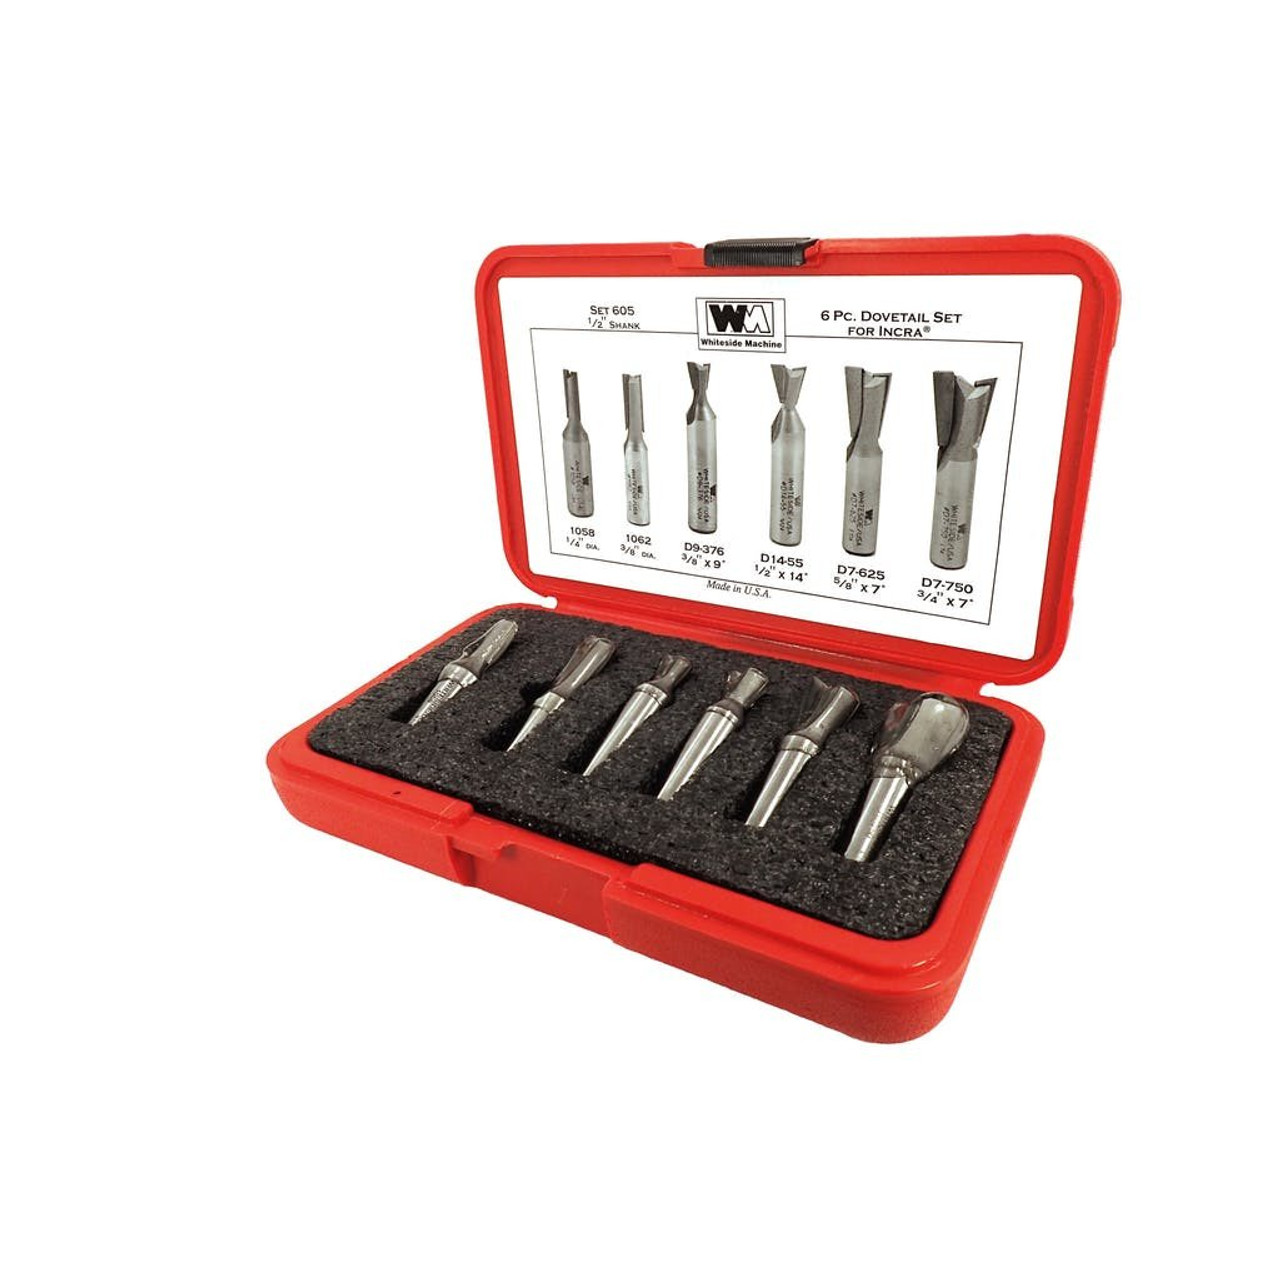 Whiteside 605 Incra Dovetail Bit Set for Woodworking - 6 PIECE 1/2"SH